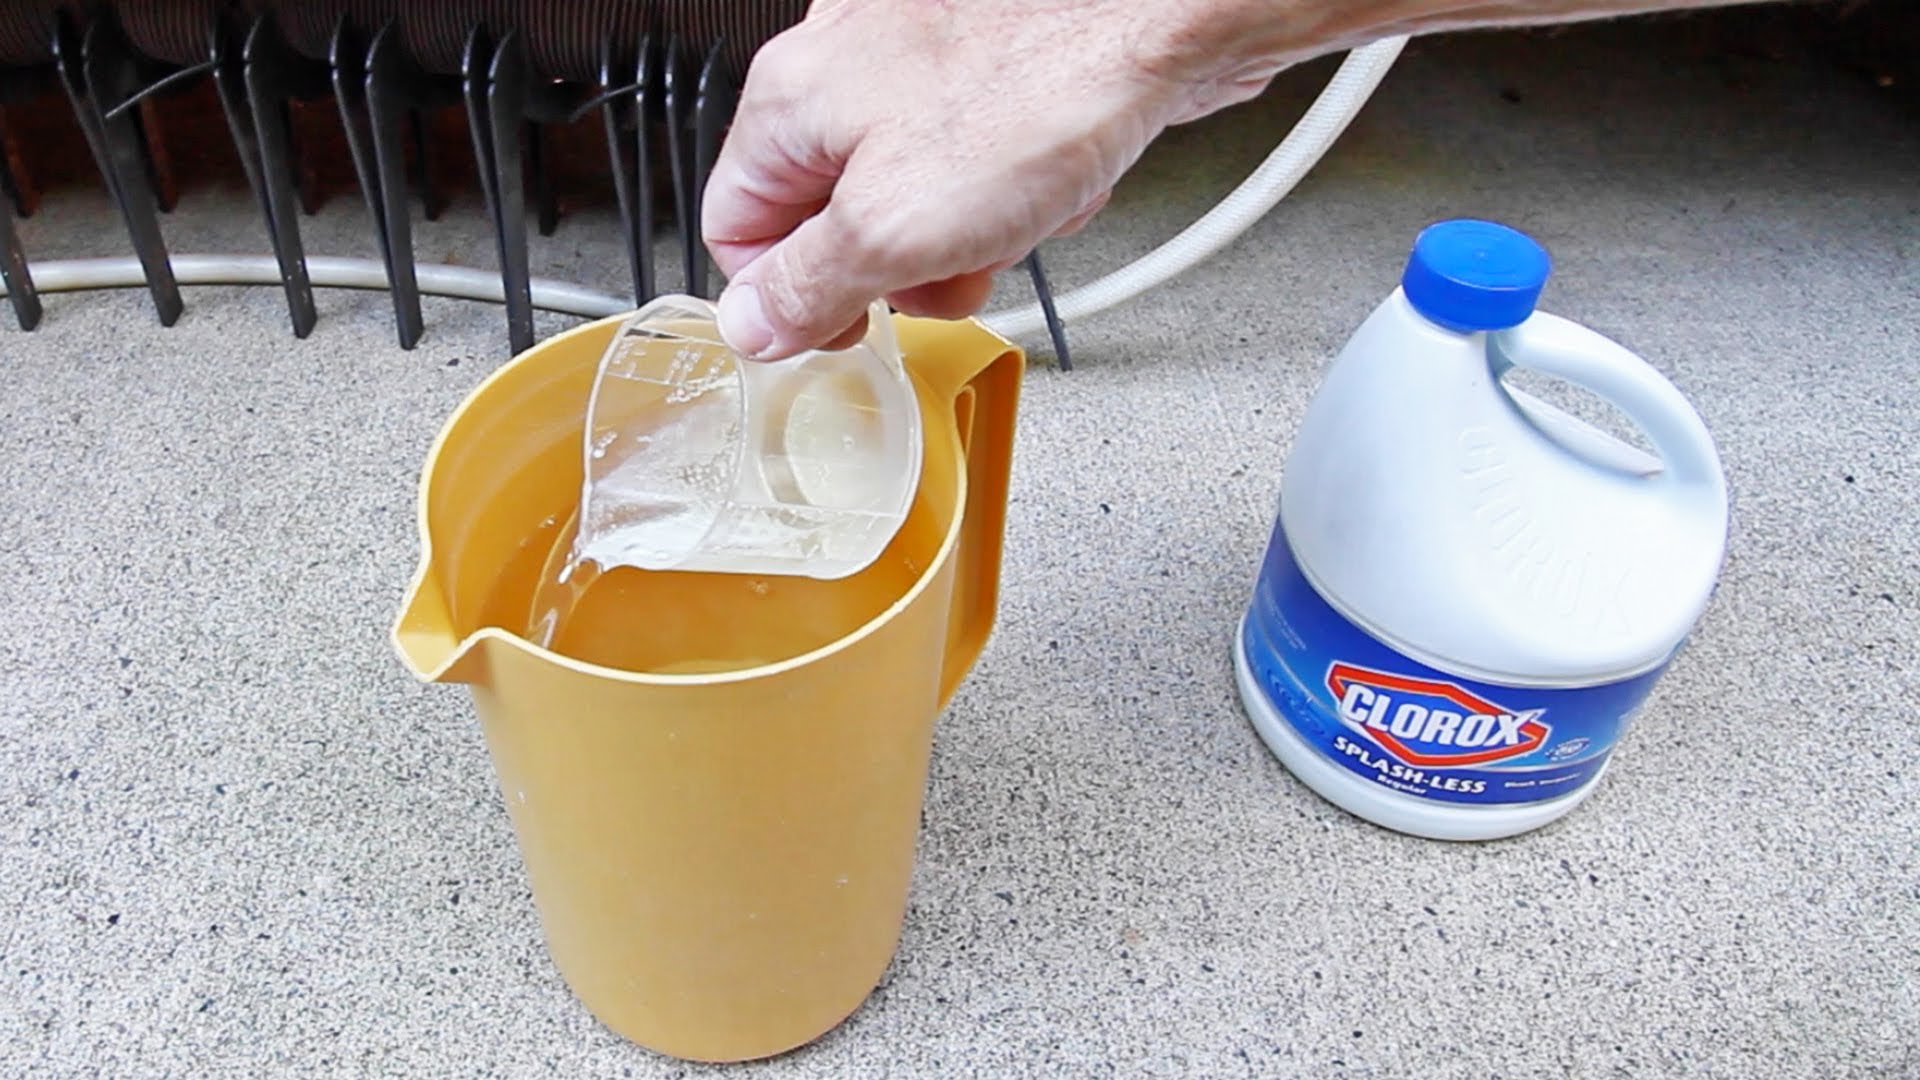 How to clean tile grout | HireRush Blog